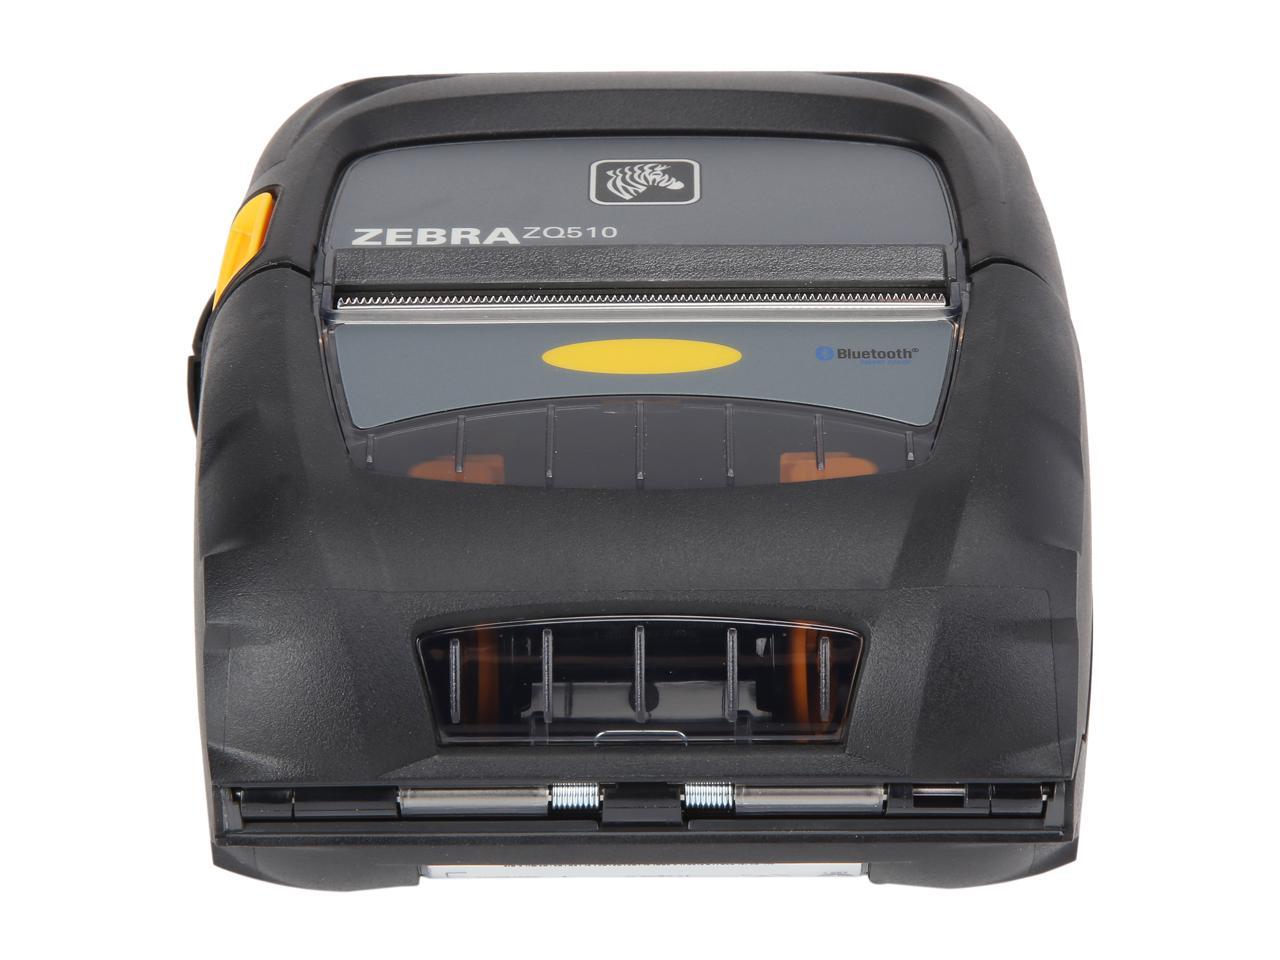 Zebra Zq510 3 Mobile Direct Thermal Receipt And Label Printer 203 Dpi Bluetooth 40 Linered 3293